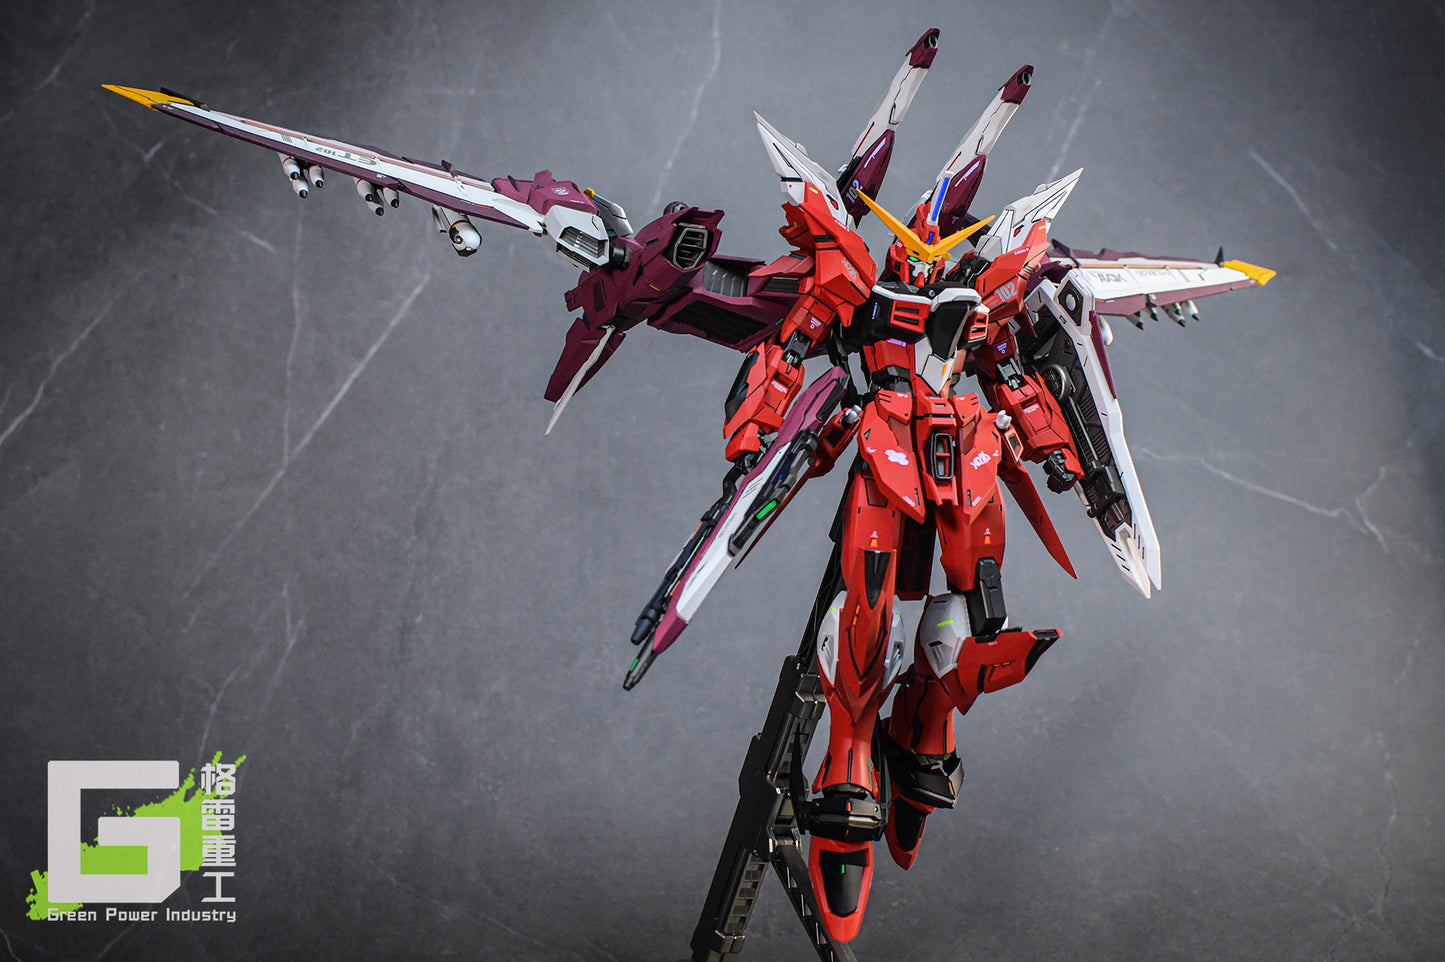 BANDAI MG ZGMF-X09A JUSTICE GUNDAM WITH FORTUNE MEOW STUDIO GK MODIFICATION VER.RED